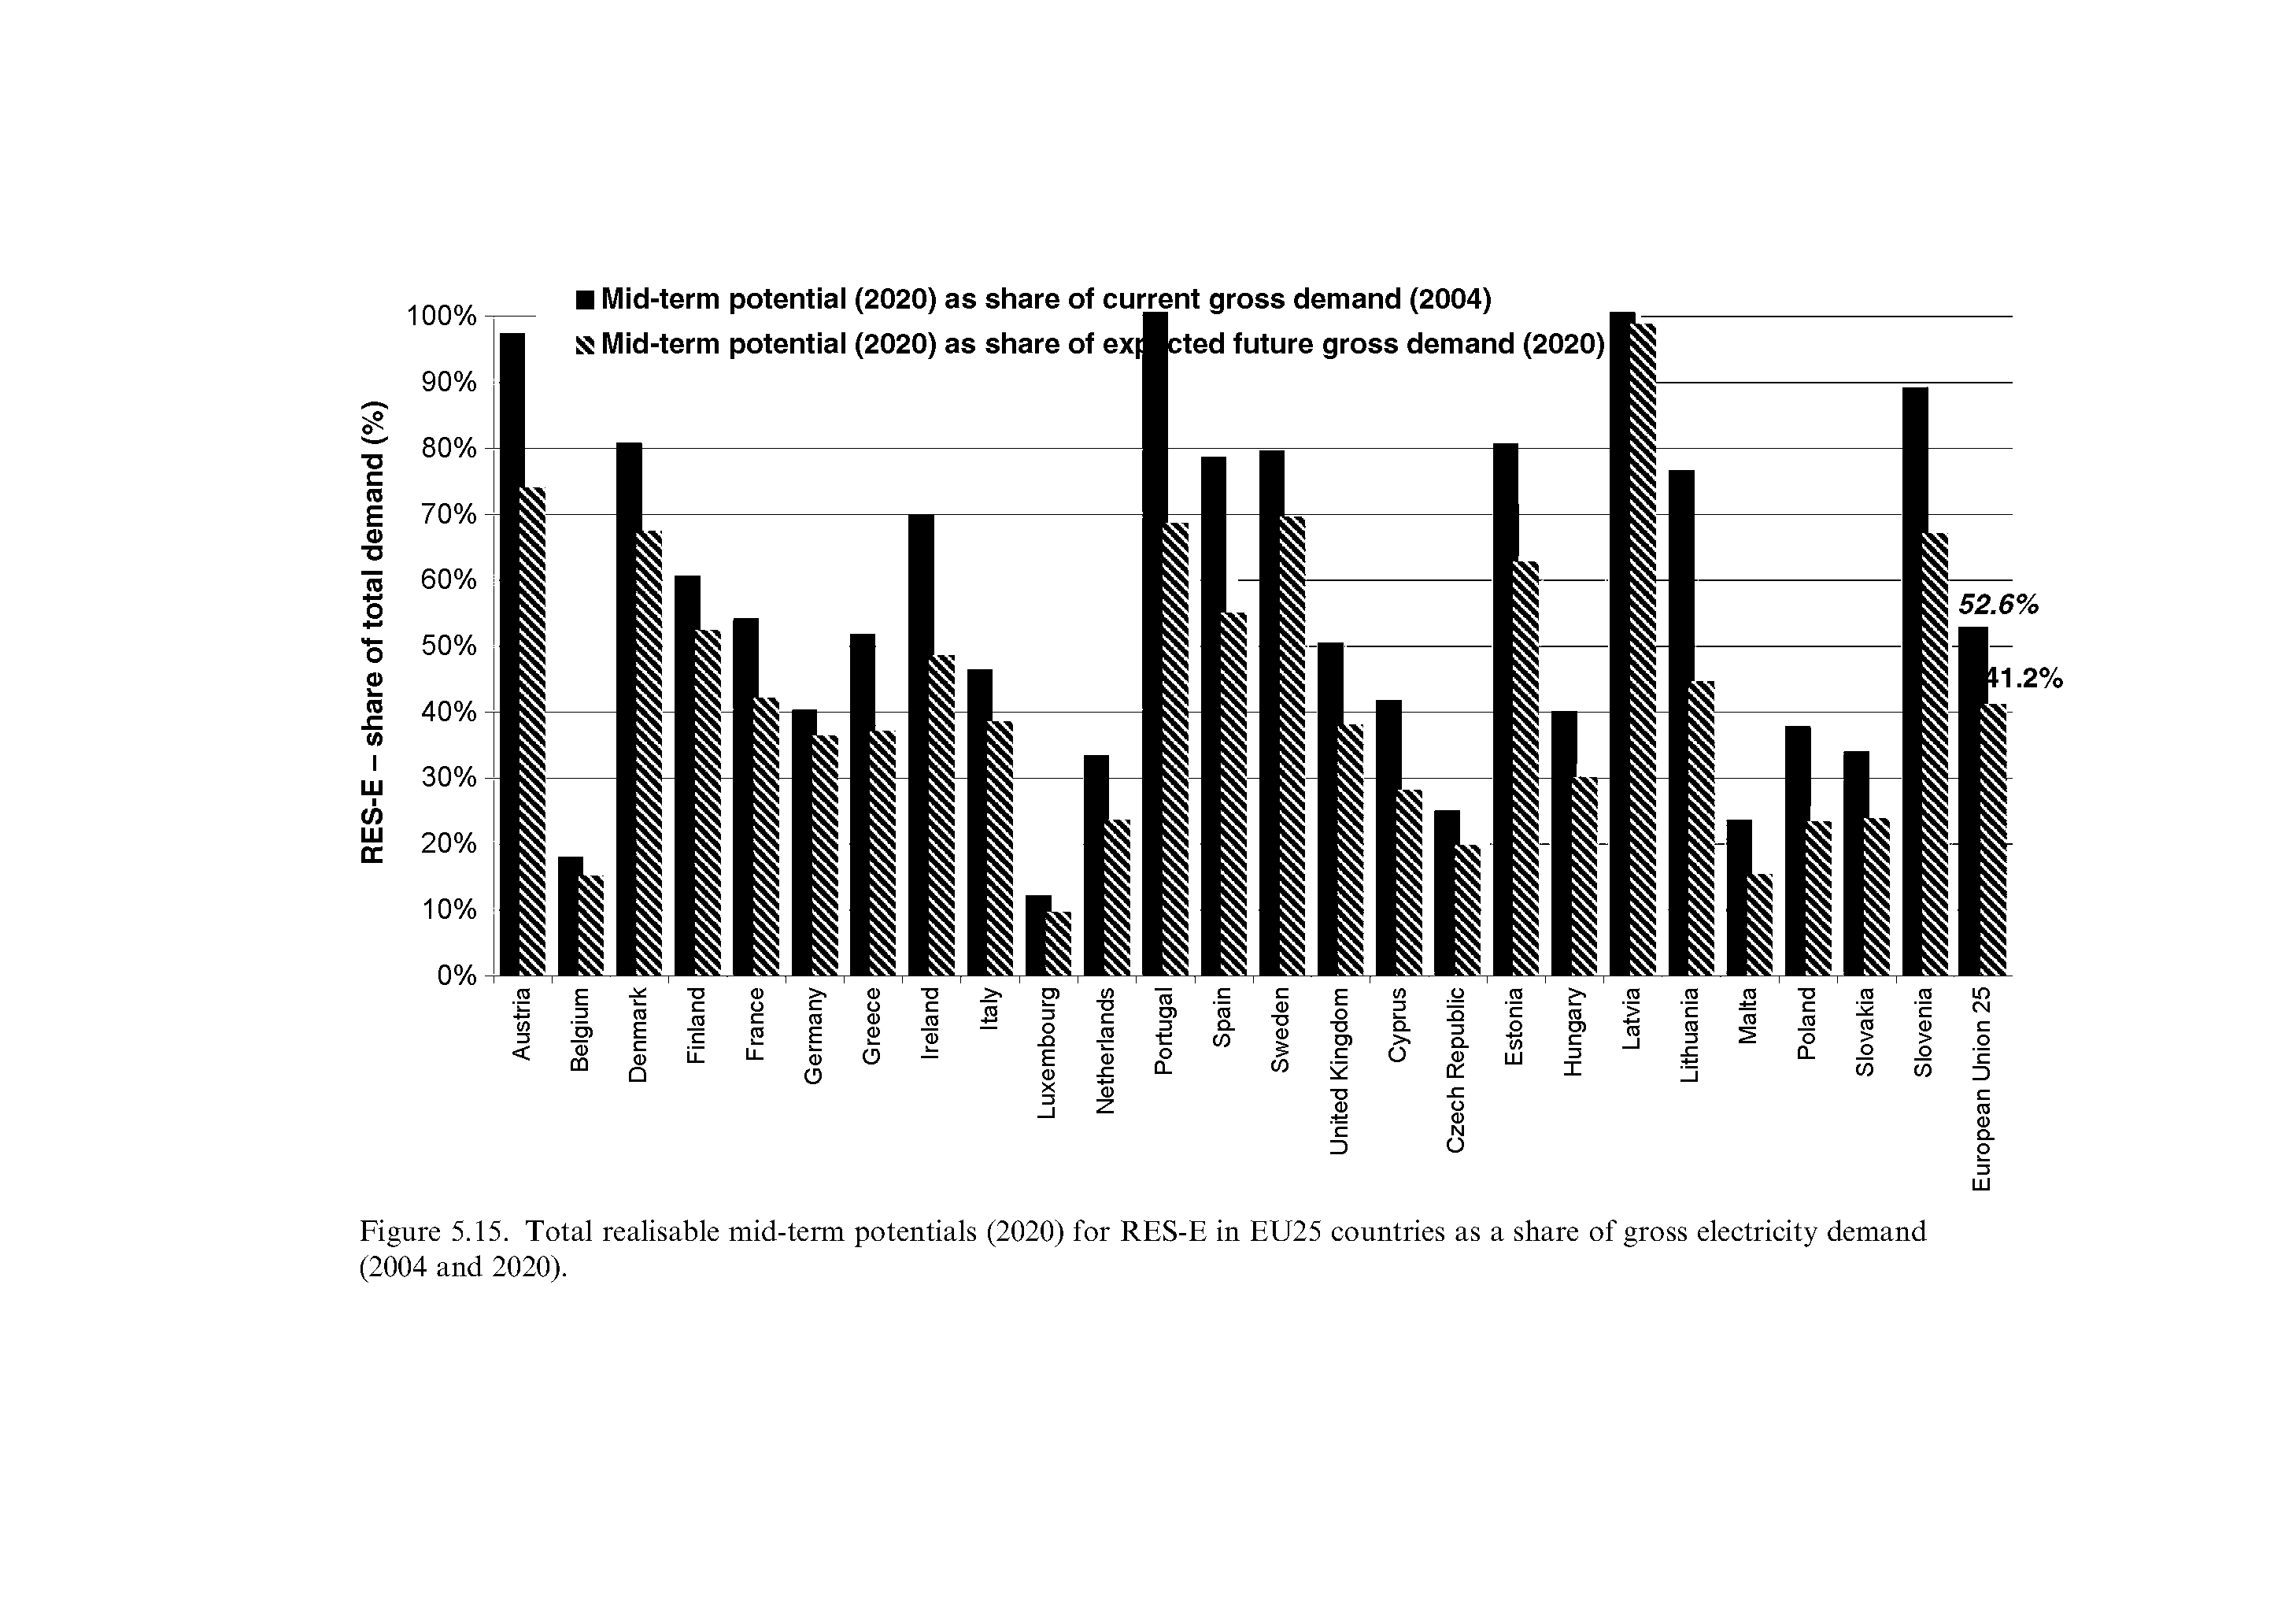 Figure 5.15. Total realisable mid-term potentials (2020) for RES-E in EU25 countries as a share of gross electricity demand (2004 and 2020).